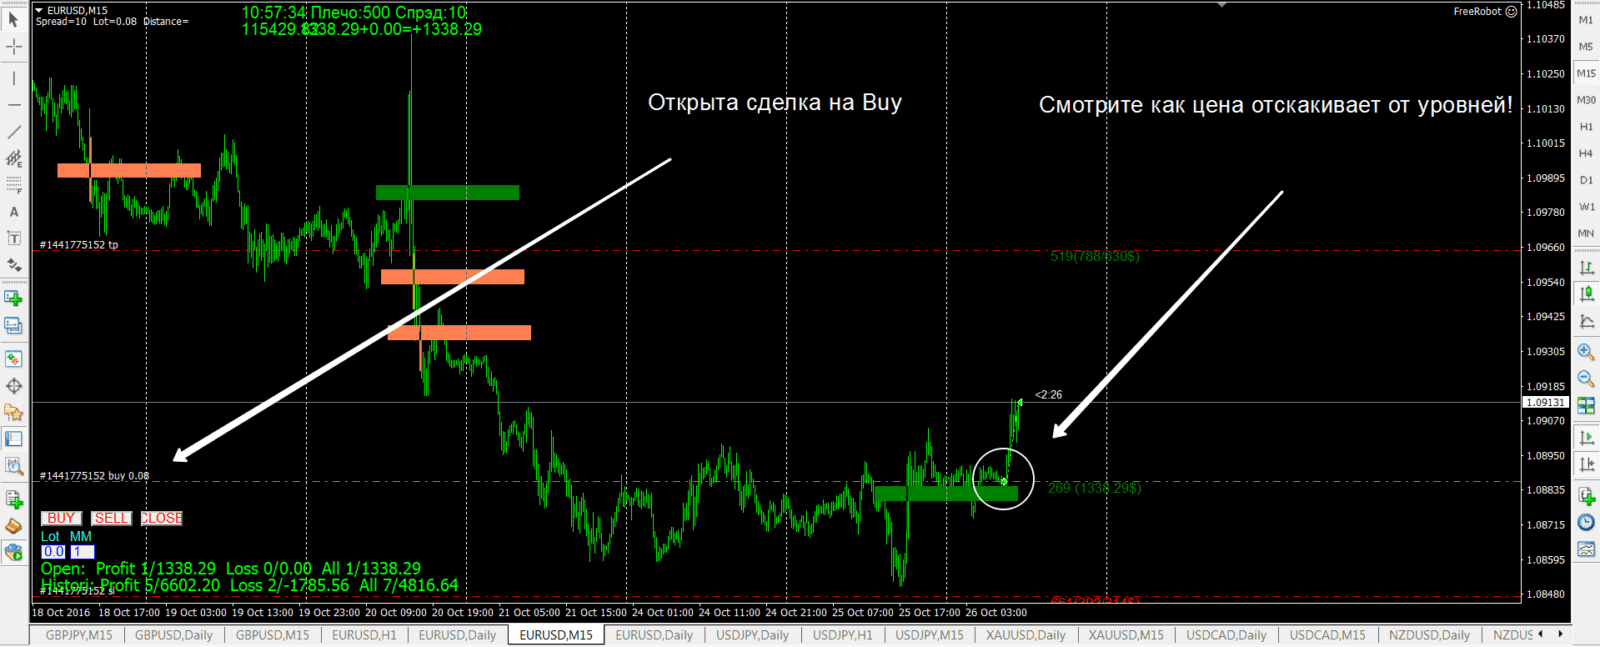 Trade on Buy on EUR/USD